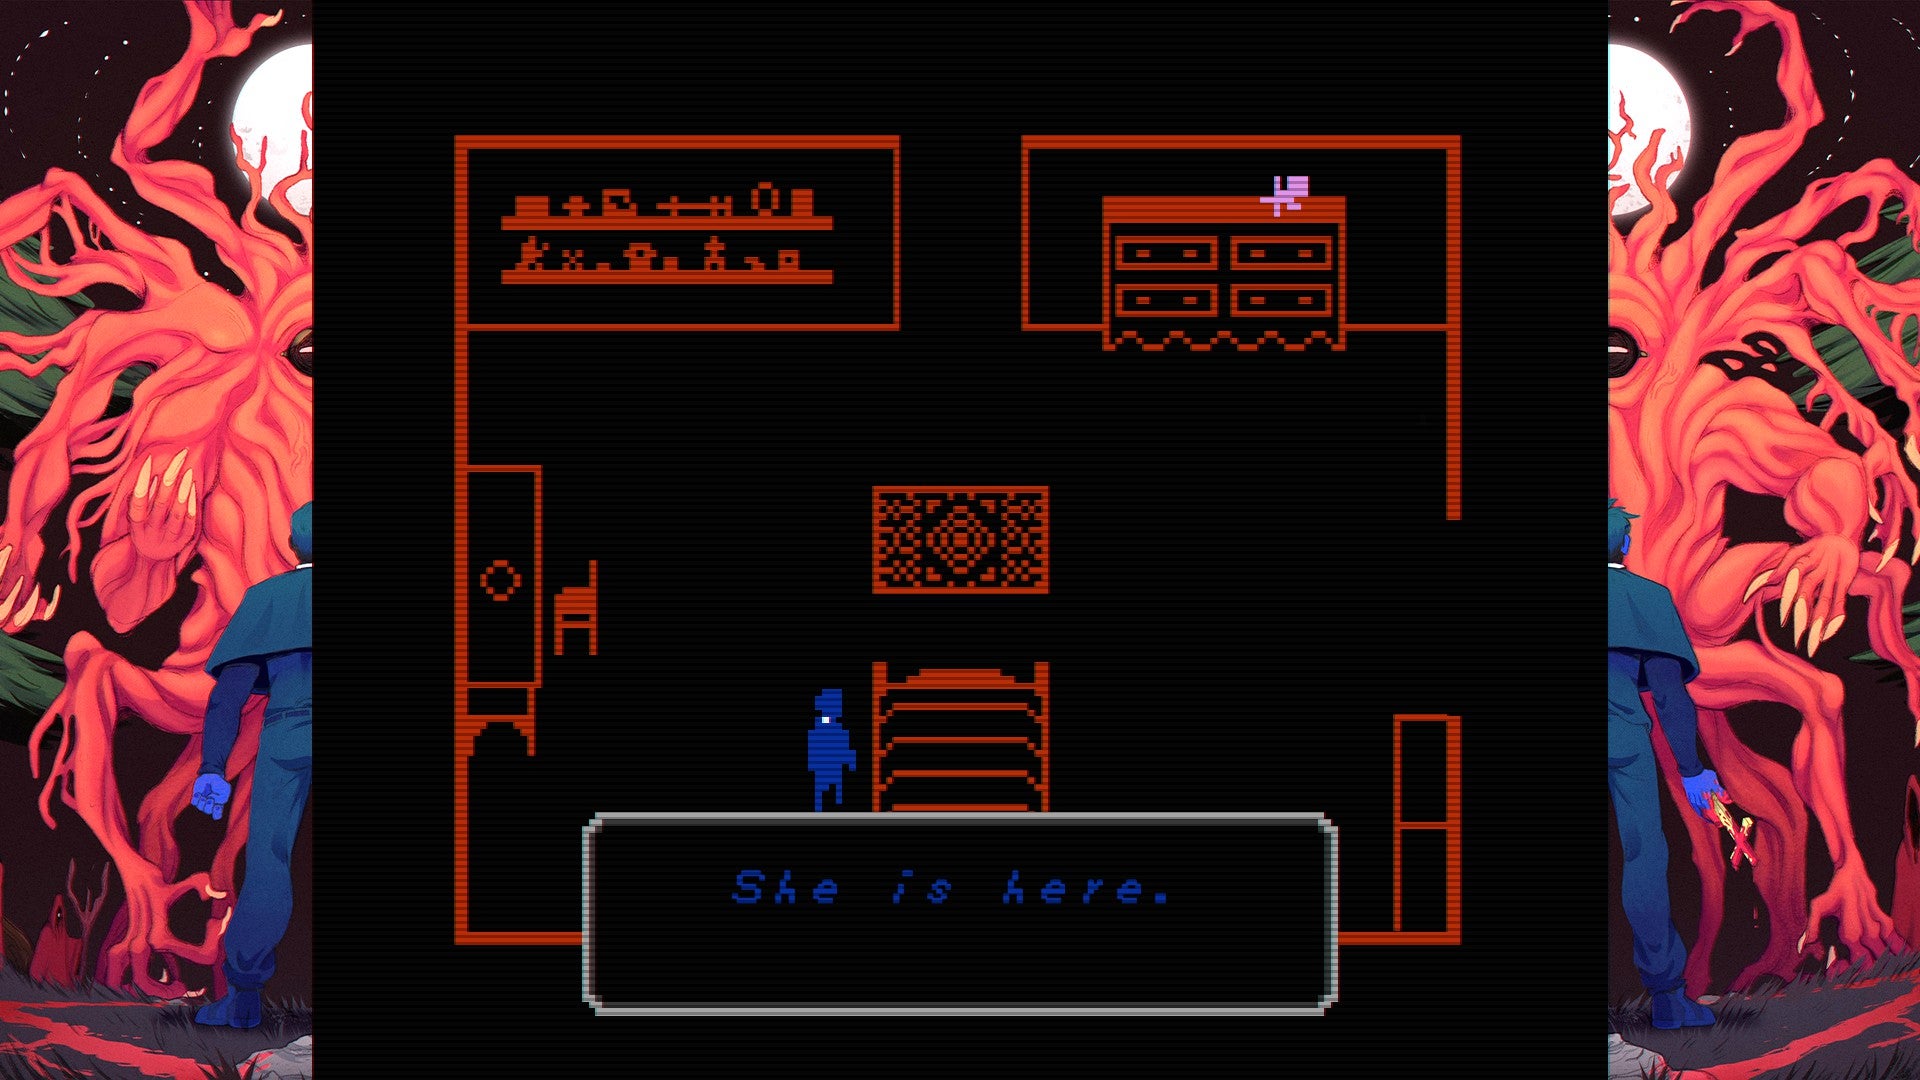 A very simple screen with a outlined room from above, drawn in one color against a black background.  There's a blue blob who is the character, and then there's a dialog that says: "She's here.'